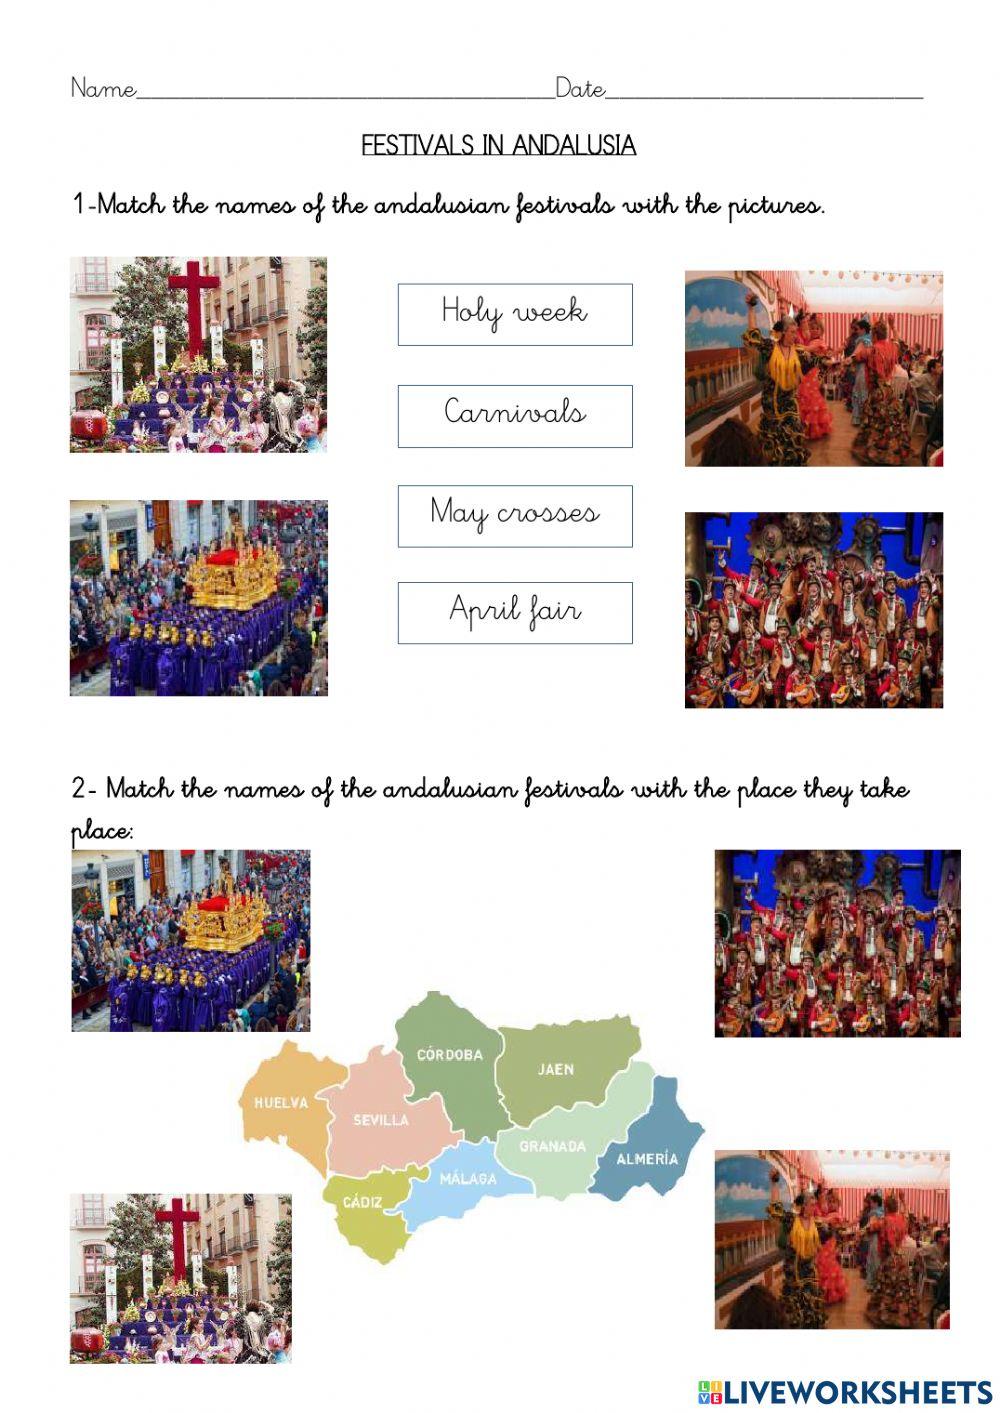 Festivals in Andalusia